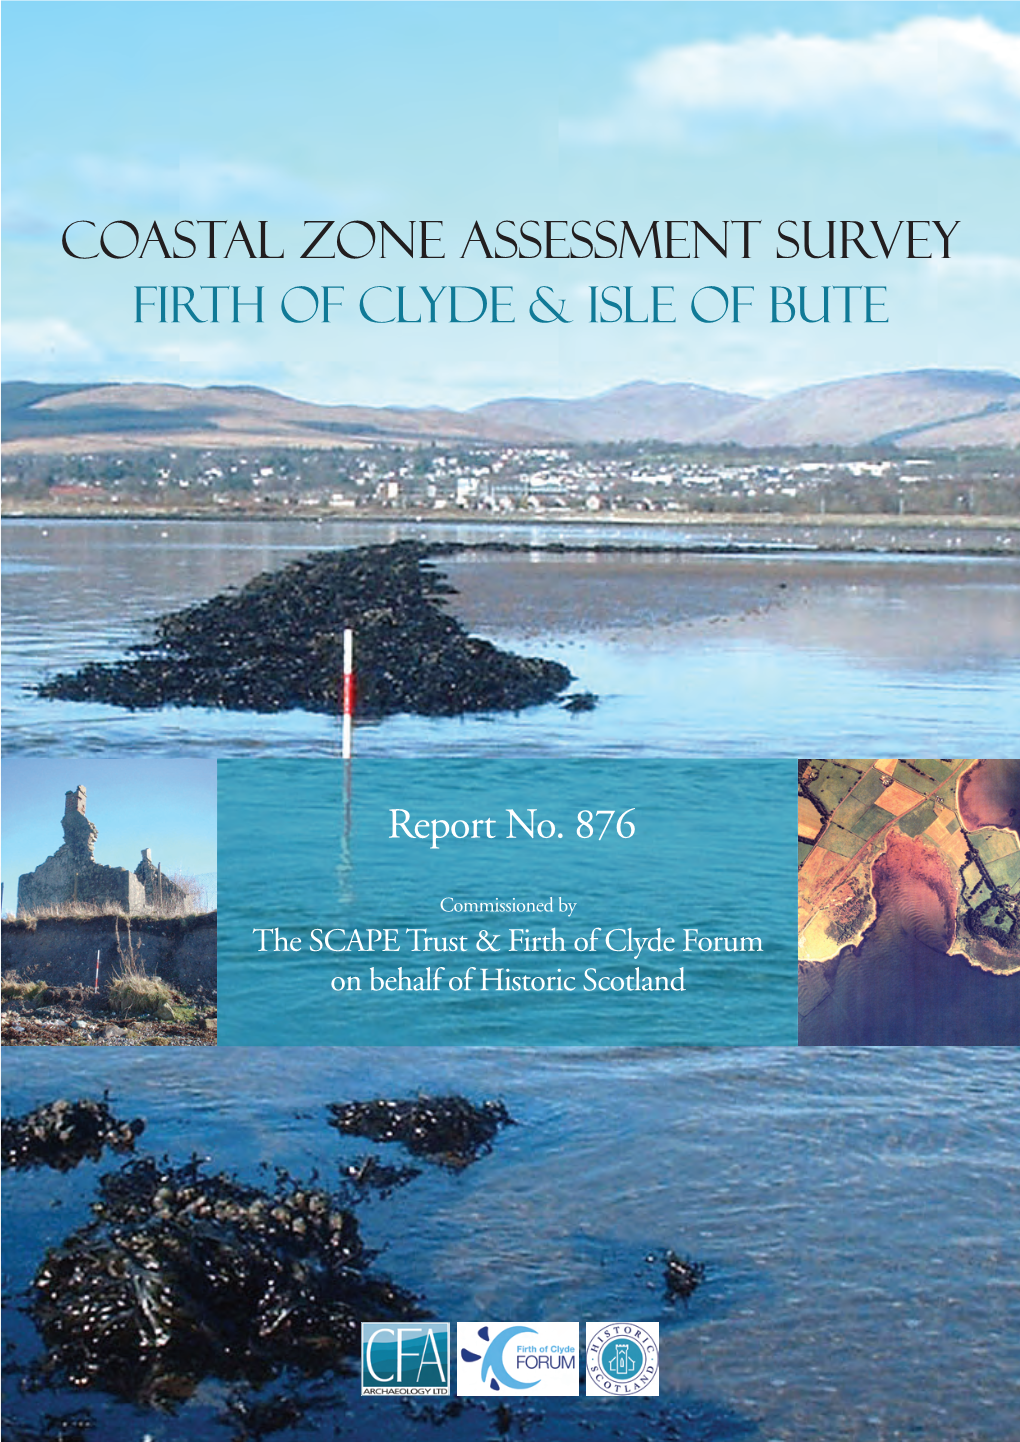 COASTAL ZONE ASSESSMENT SURVEY Firth of Clyde & Isle of Bute